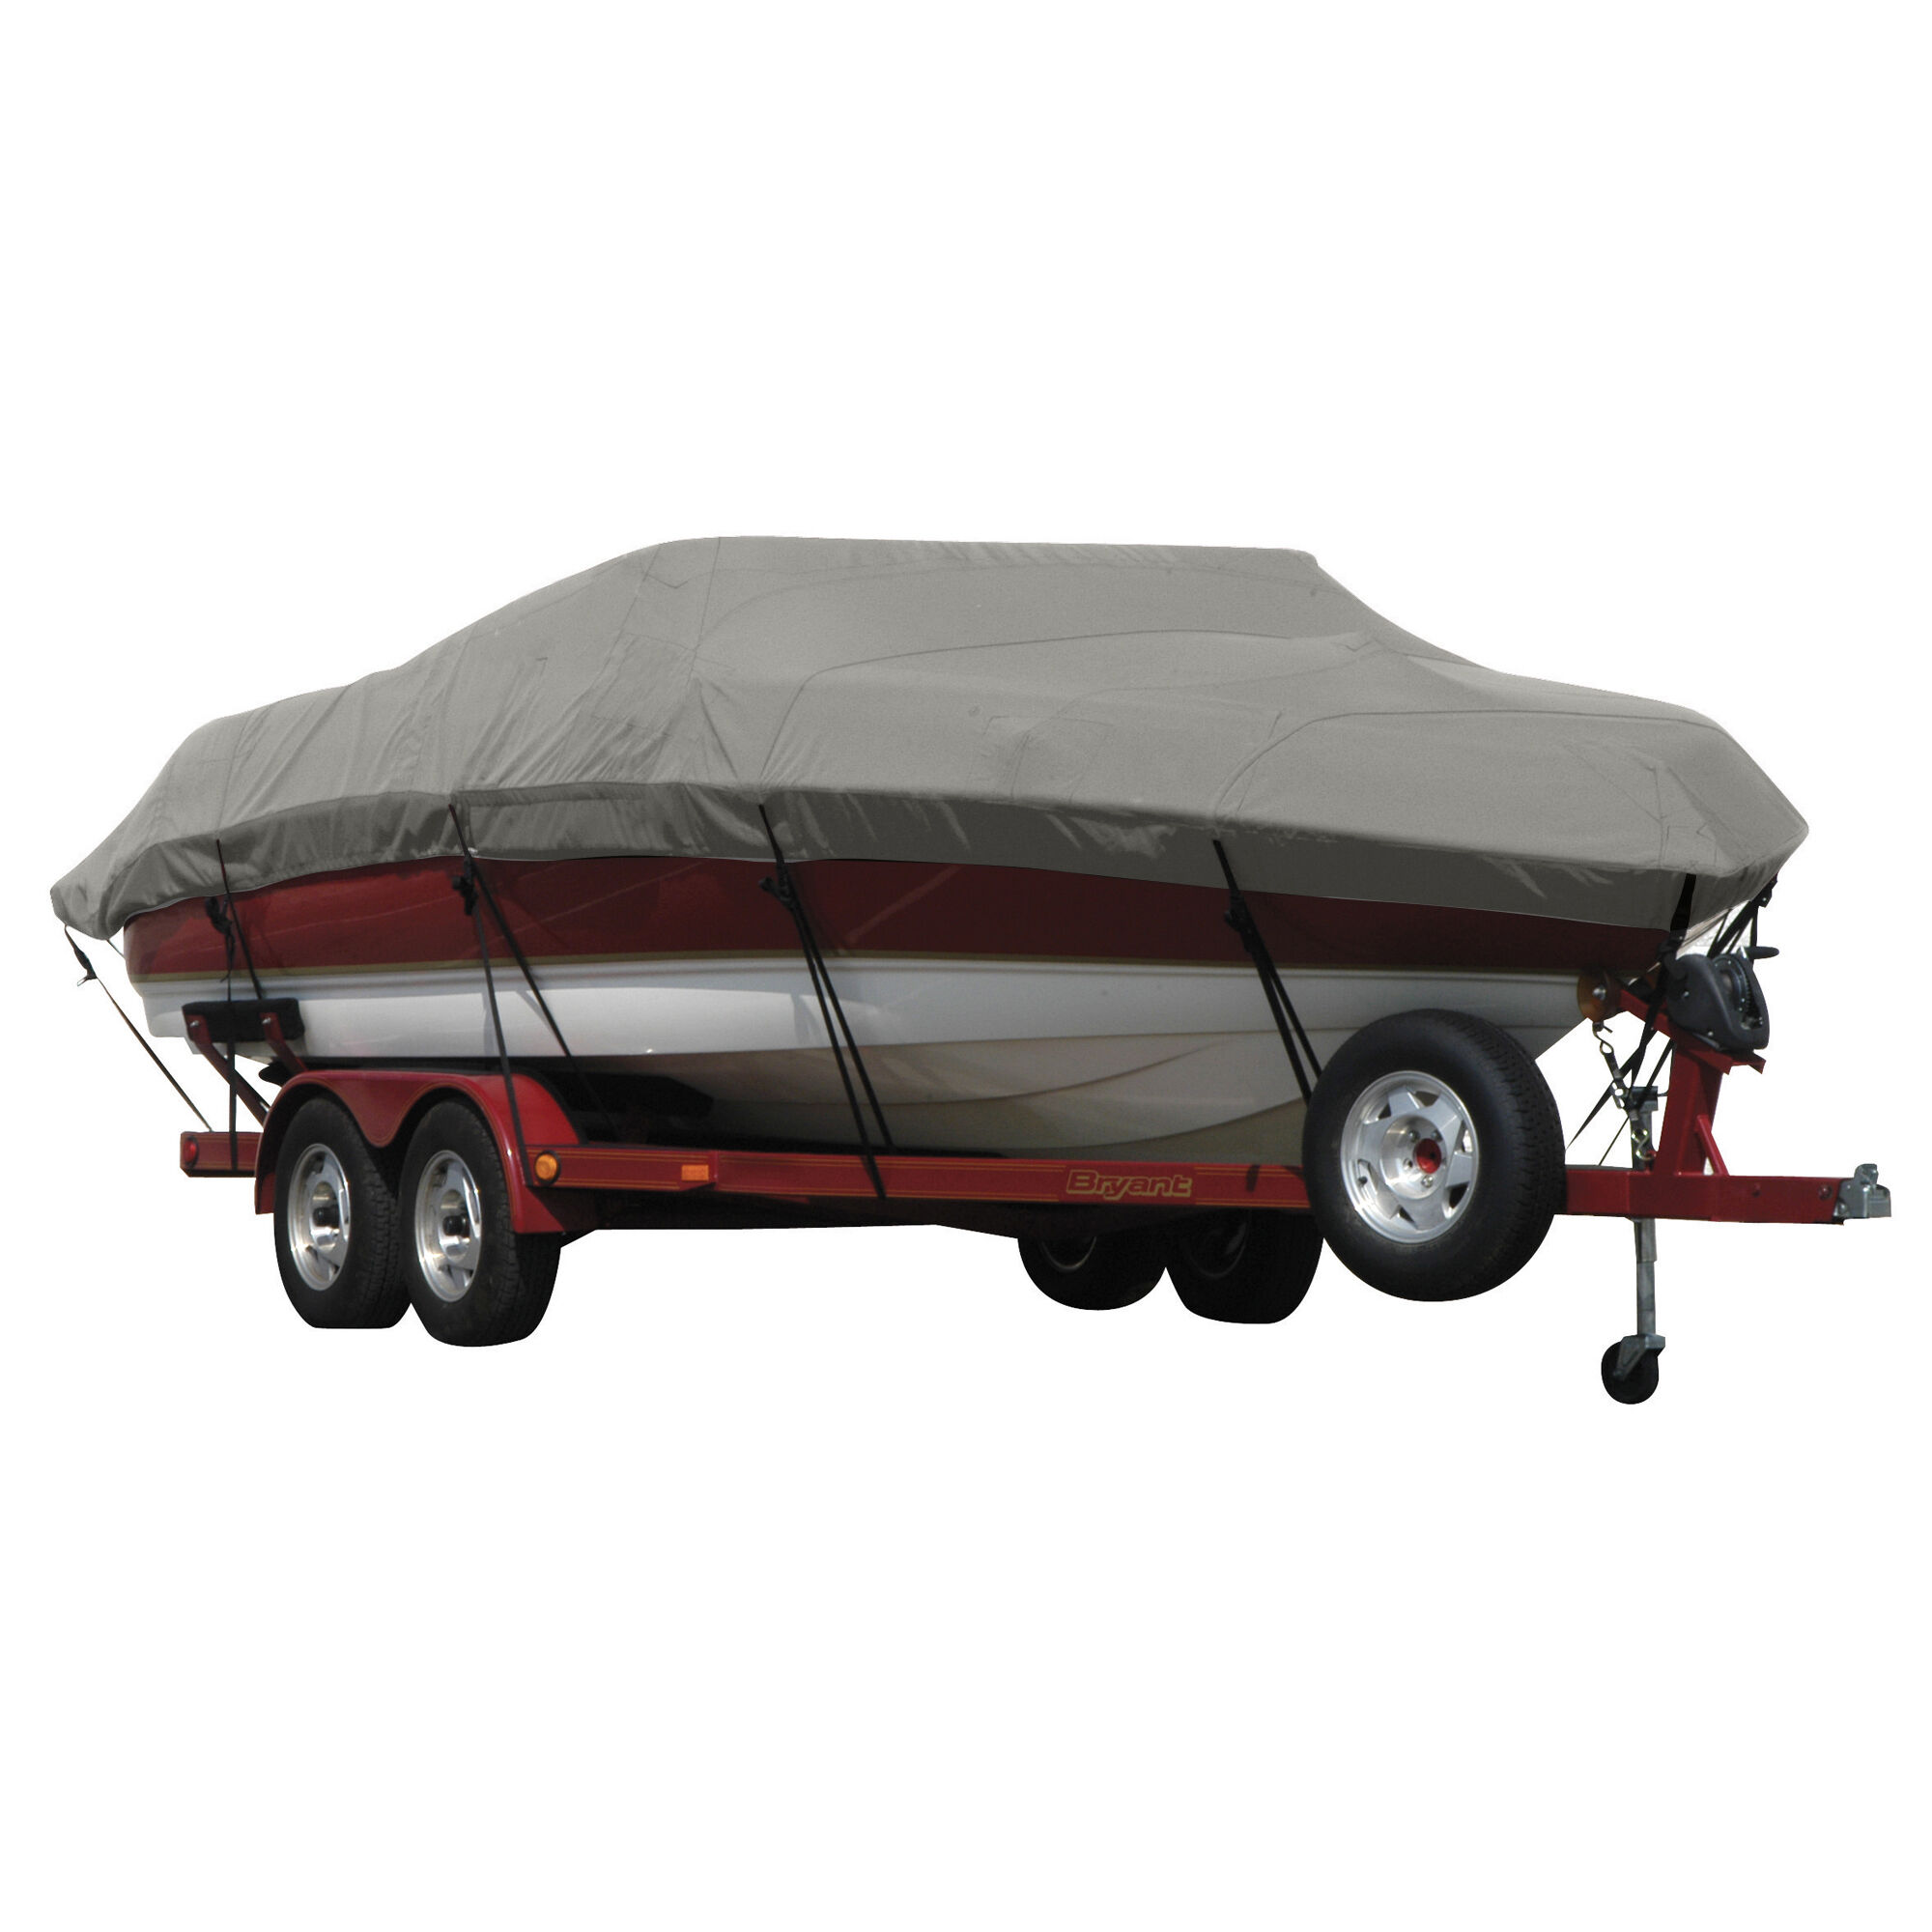 Covermate Exact Fit Sunbrella Boat Cover for Tige 2000 Slm Comp 2000 Slm Comp Does Not Cover Swim PLATFORMm. Charcoal Grey Heather in